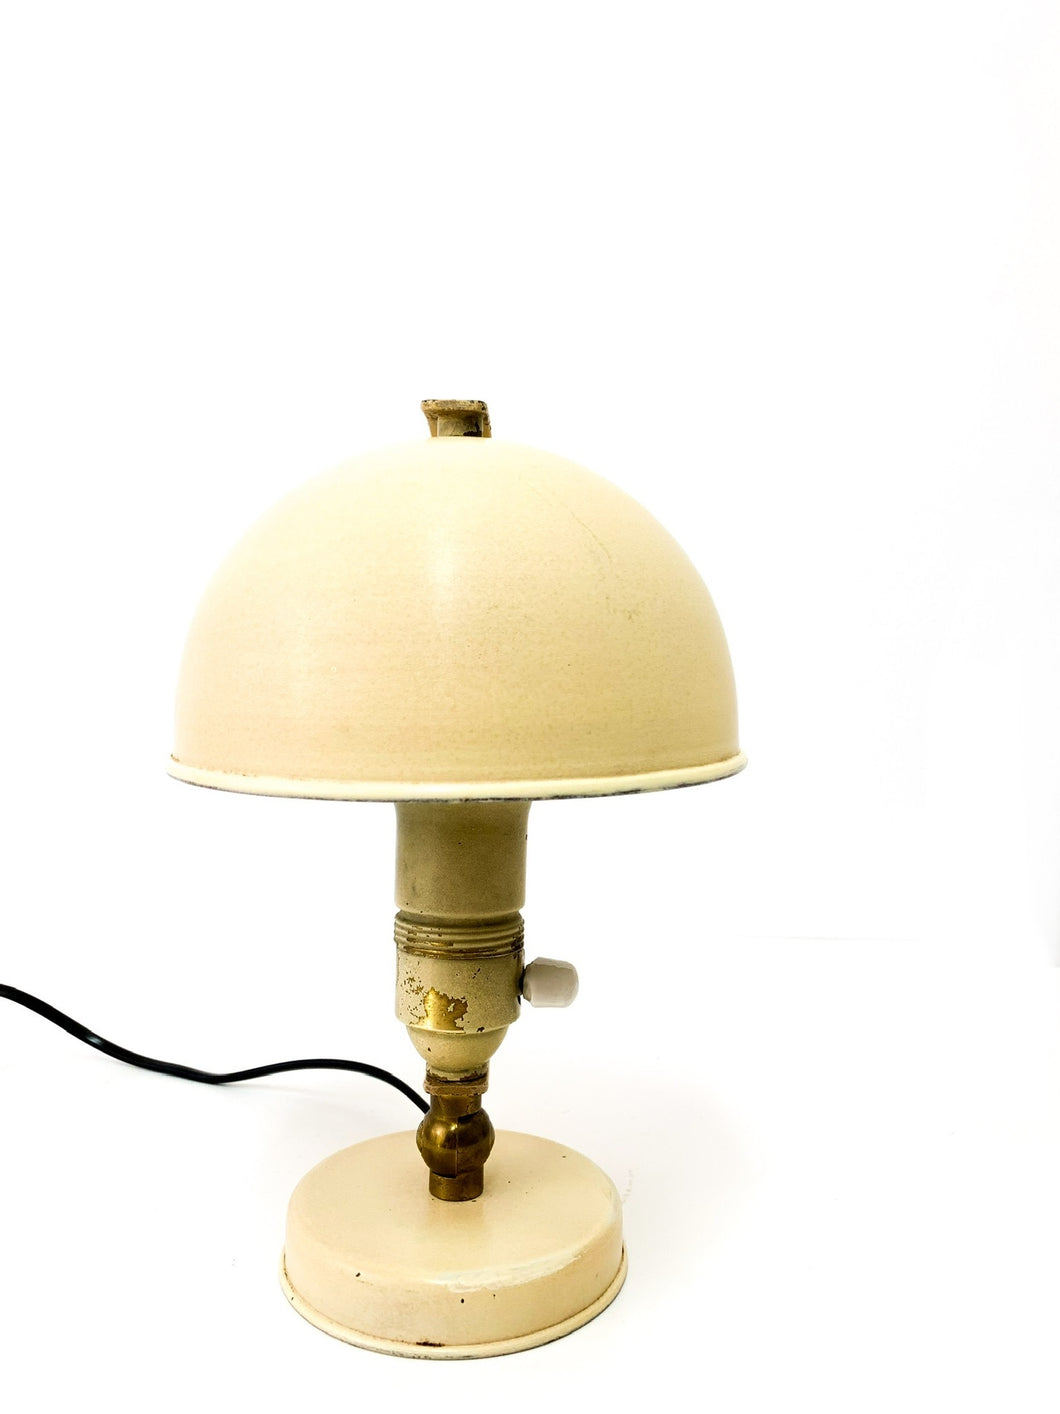 TABLE LAMP BY HARALD NOTINI FOR BÖHLMARKS STOCKHOLM